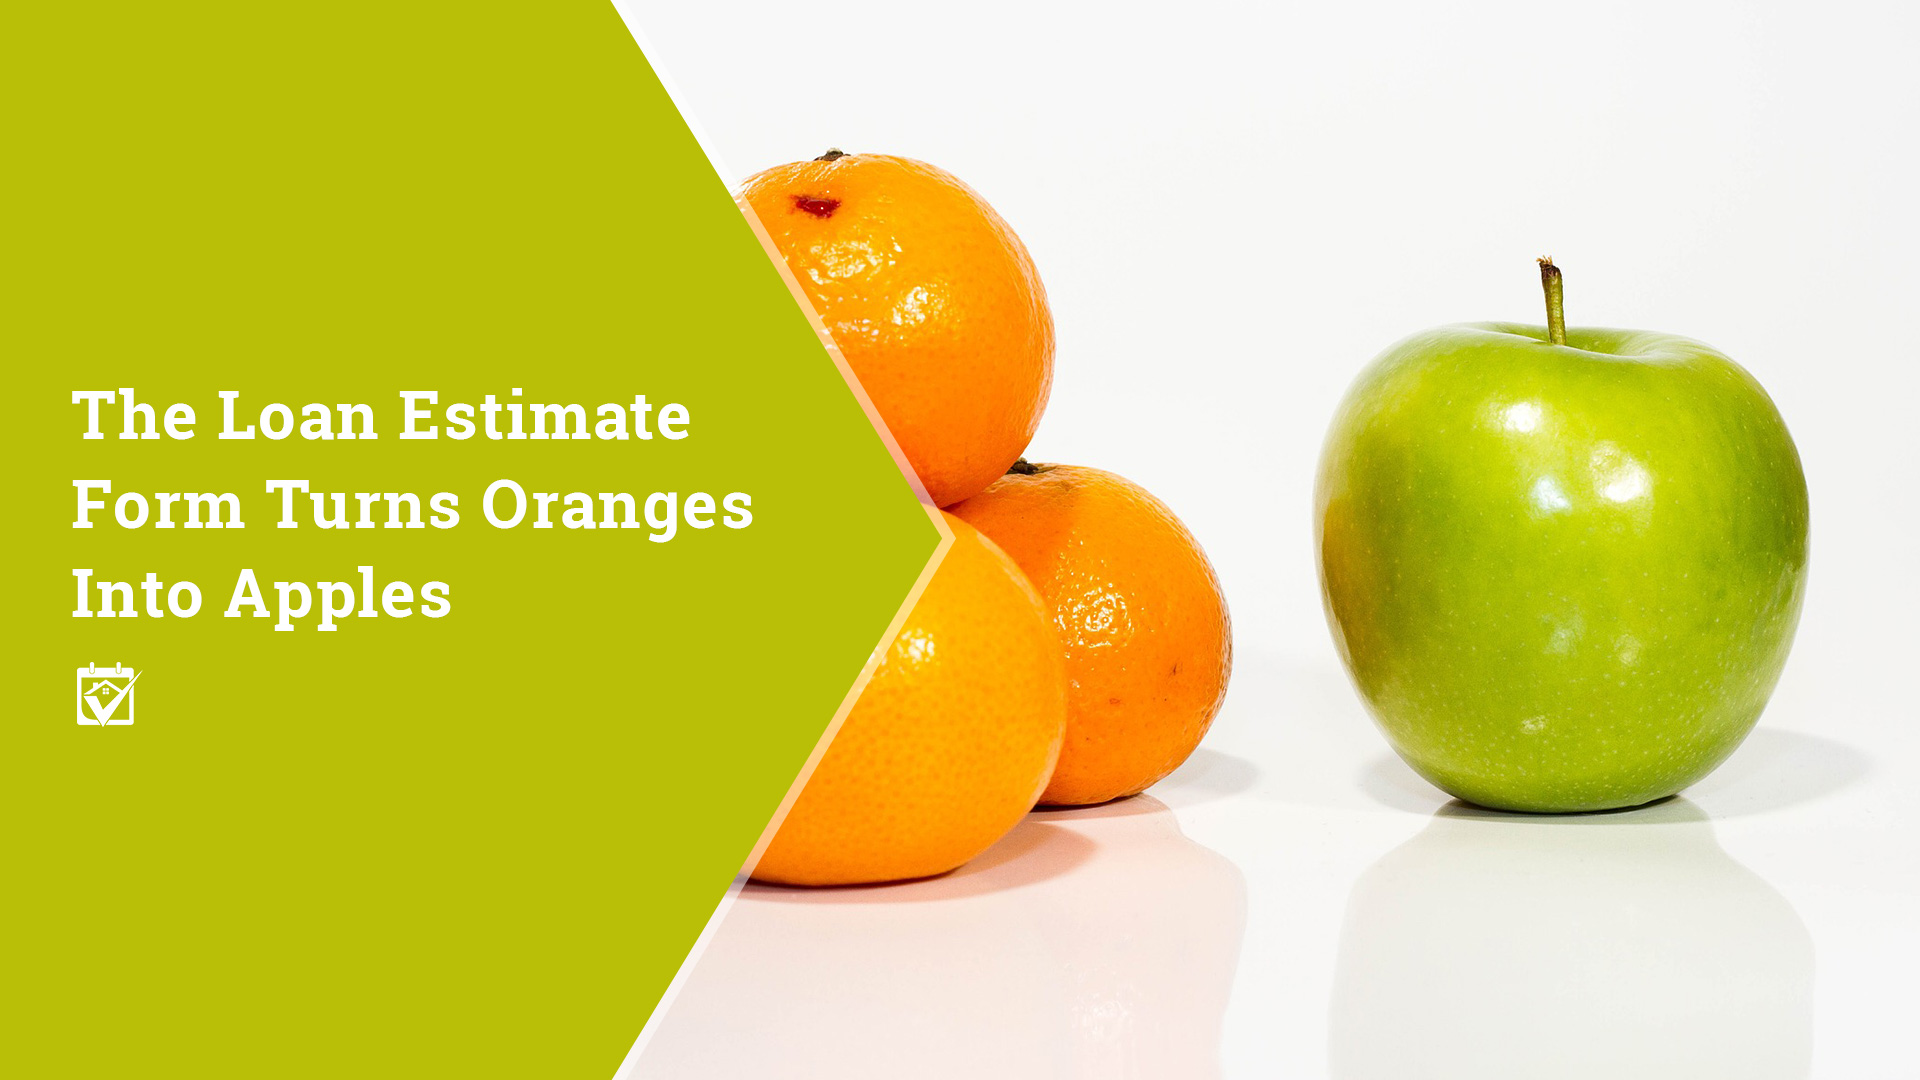 The Loan Estimate Form Turns Oranges into Apples 